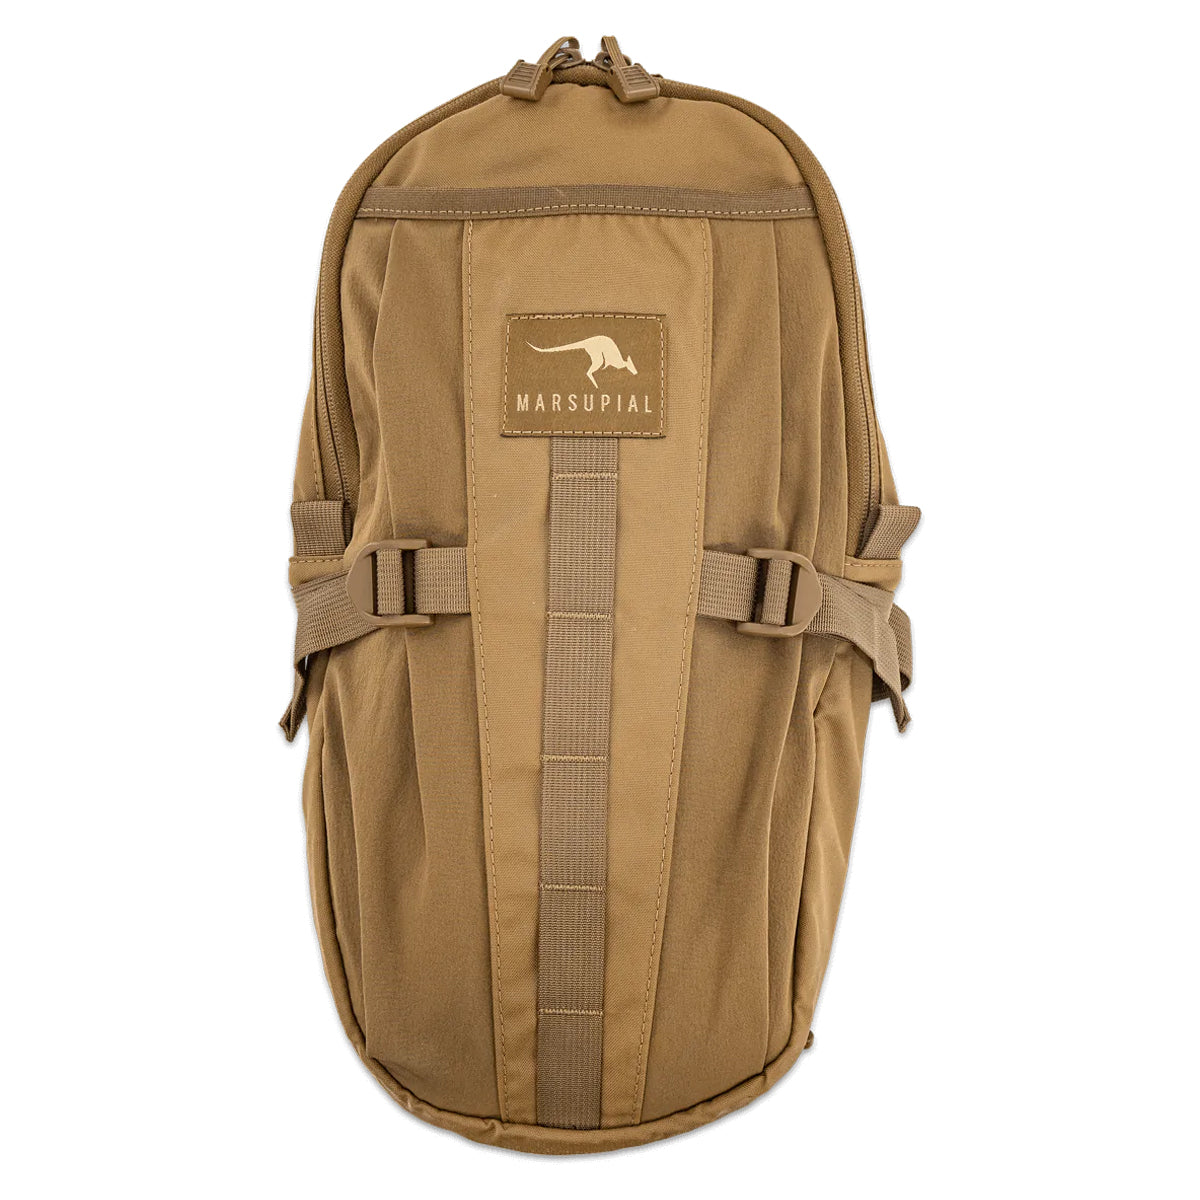 Marsupial Gear Hydration Pack in Coyote by GOHUNT | Marsupial Gear - GOHUNT Shop